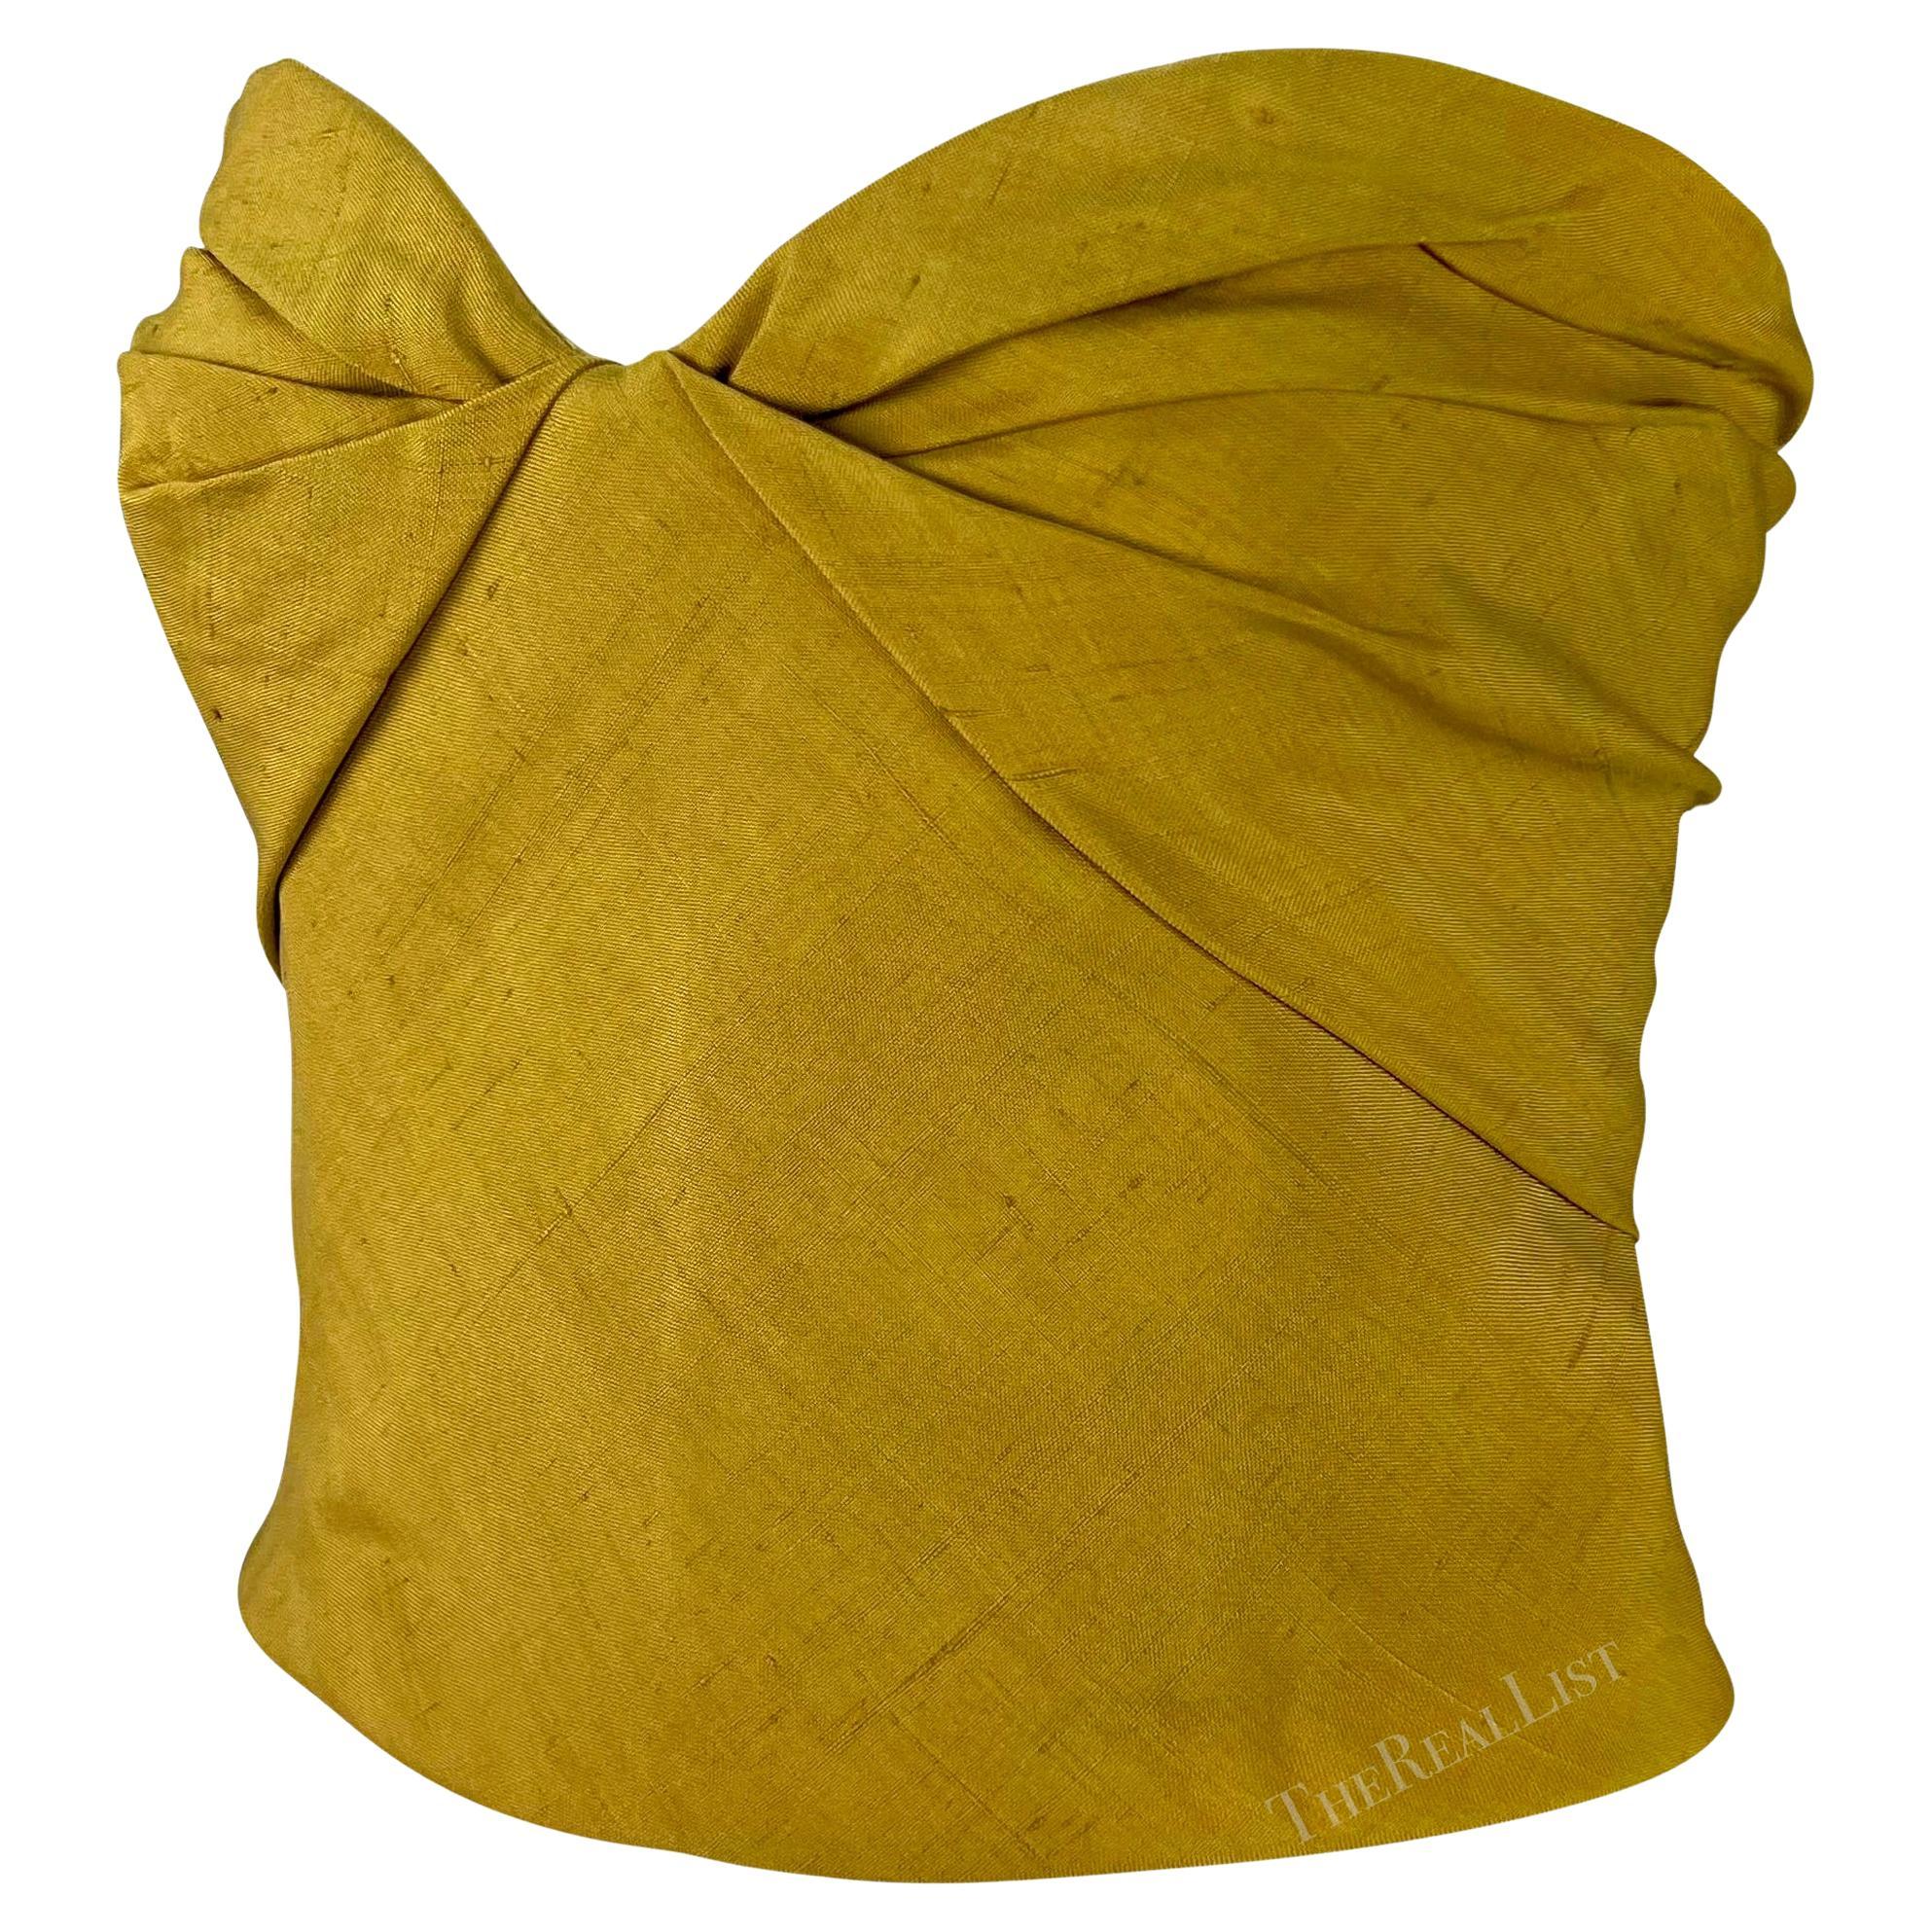 From the 1990s, this chic mustard silk Giorgio Armani strapless crop top features a sweetheart neckline with a twisted effect at the bust. This versatile vintage Giorgio Armani top is easily dressed up or down and is the perfect addition to any